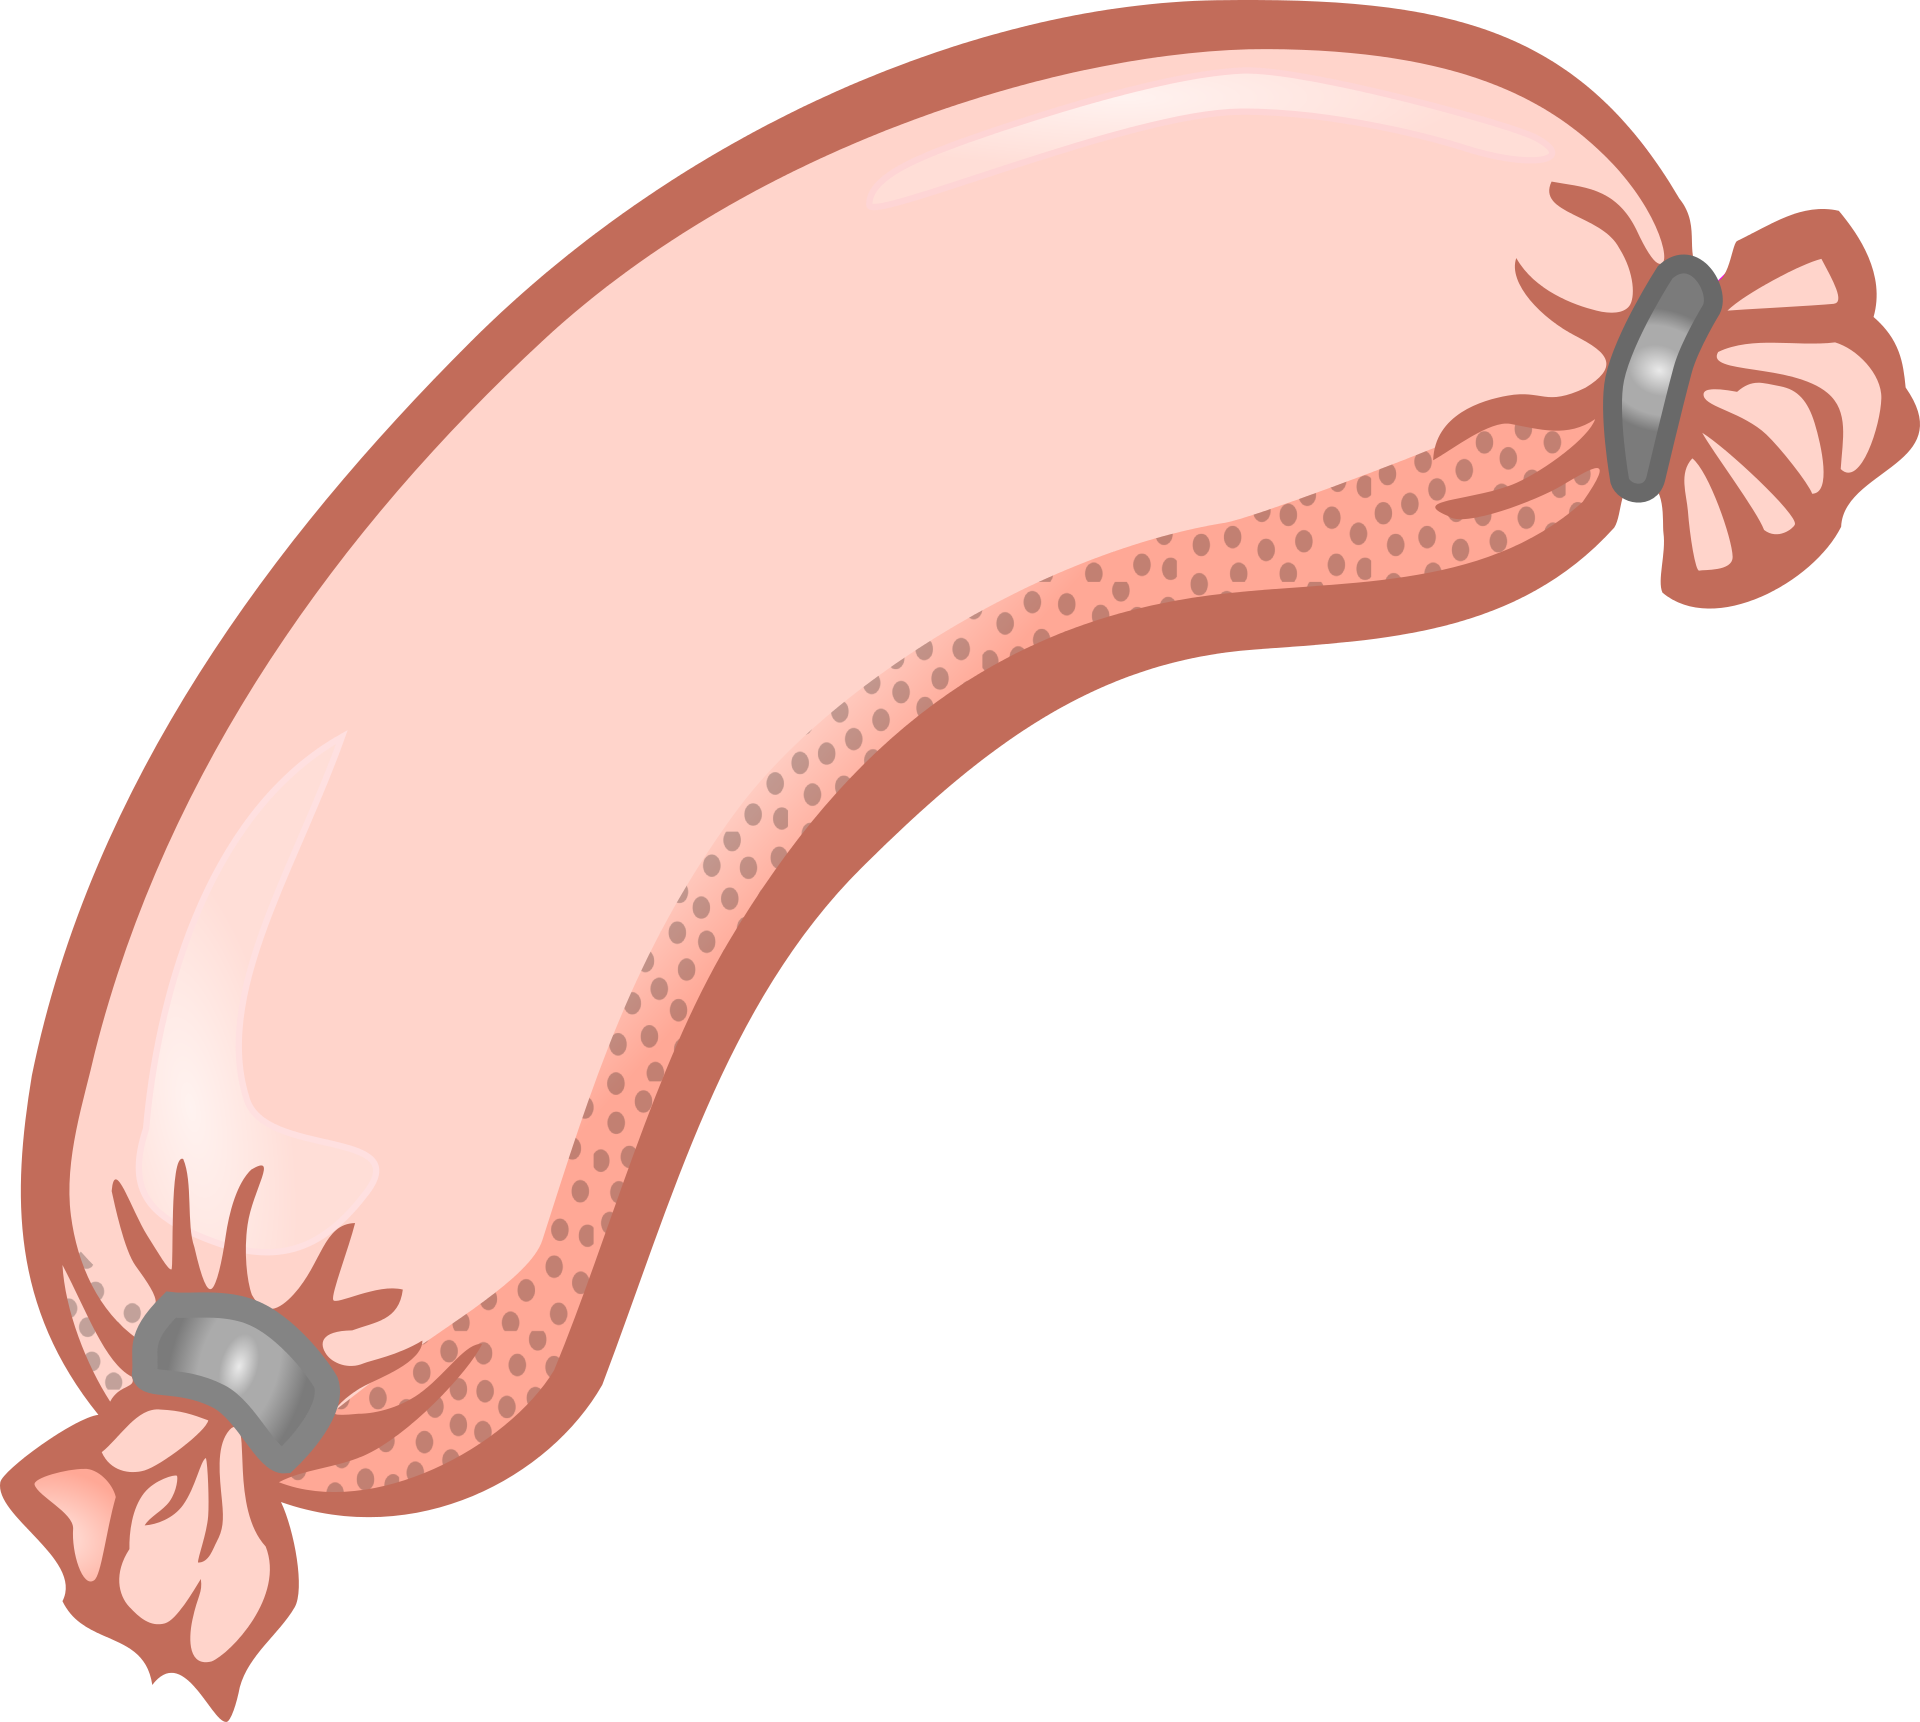 Worm clipart invertebrate. Drawing of a sausage